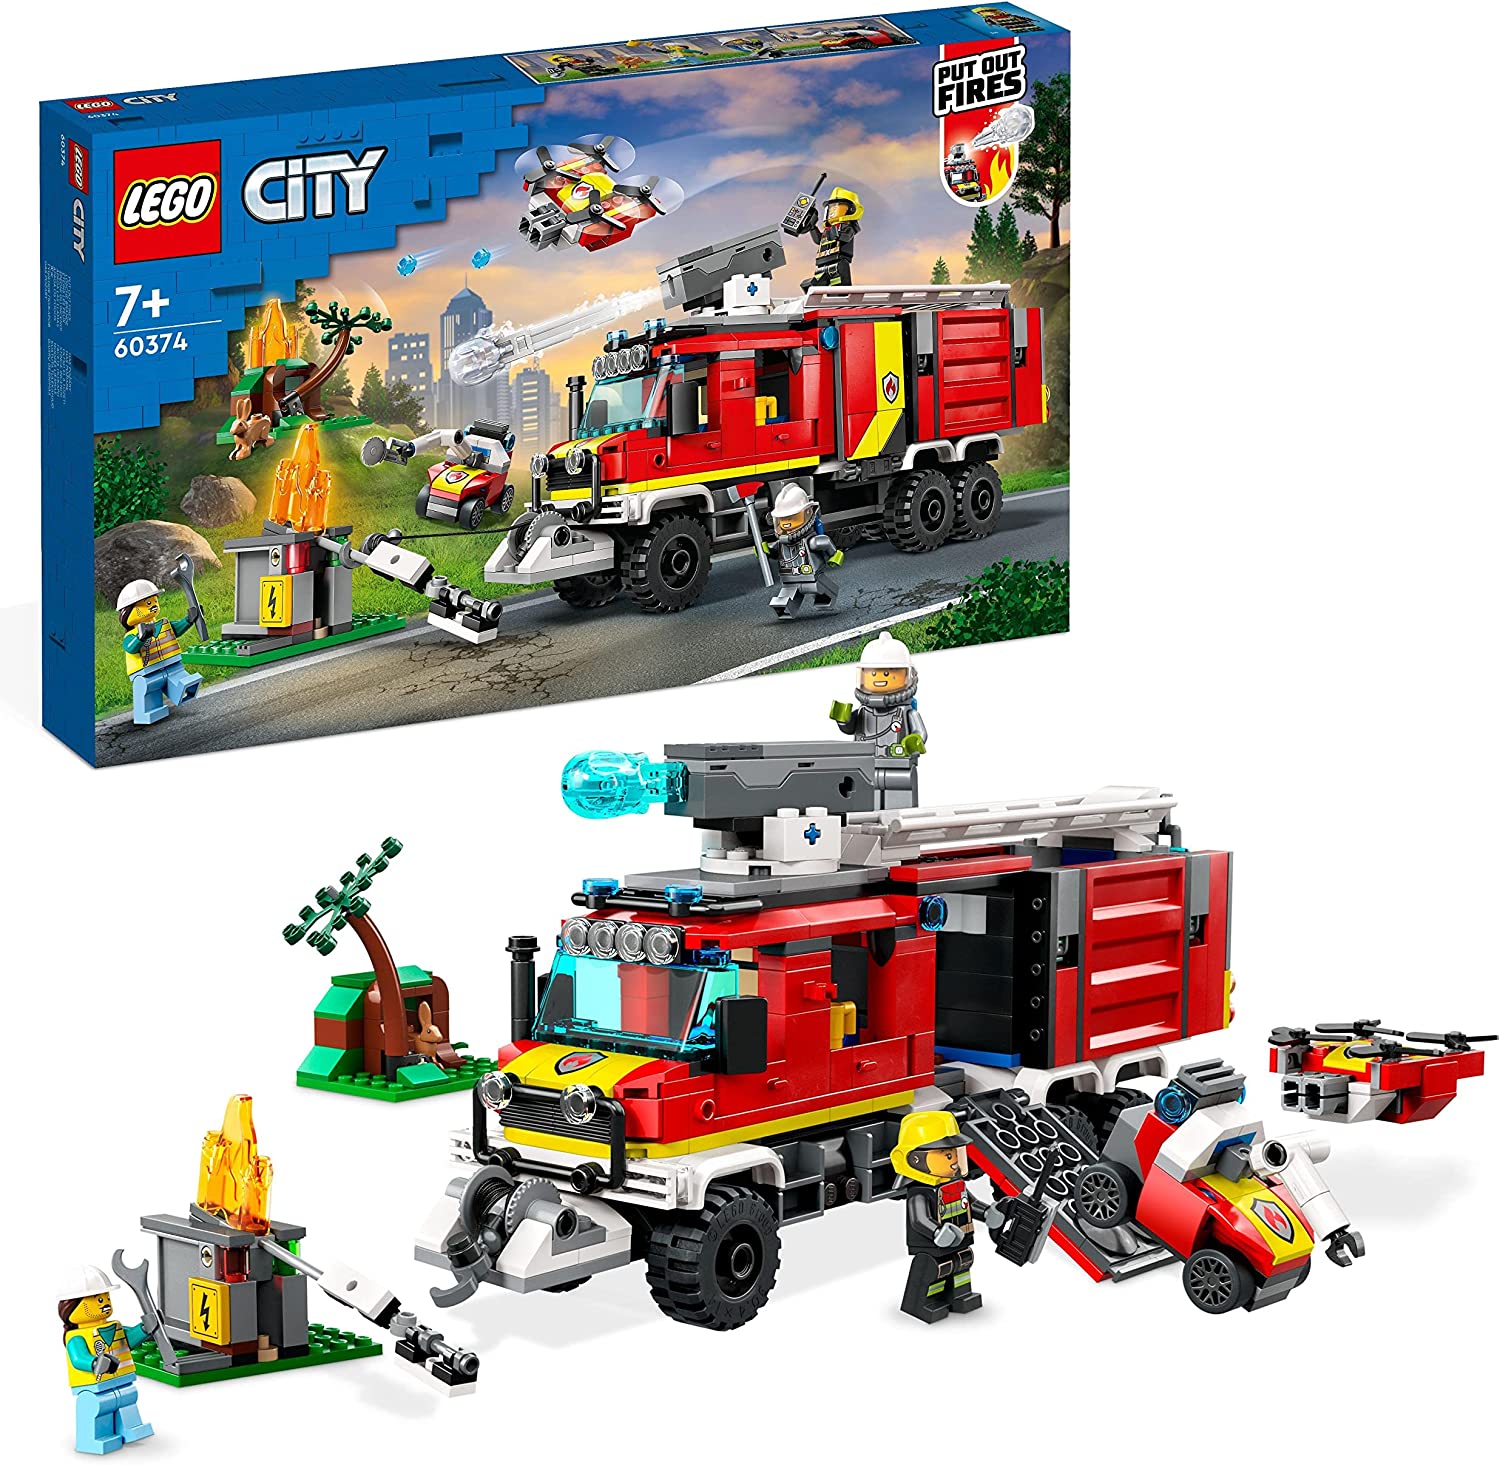 LEGO 60374 City Fire Engine Truck Modern Fire Engine Toy with Fire Drones with Figures for Kids